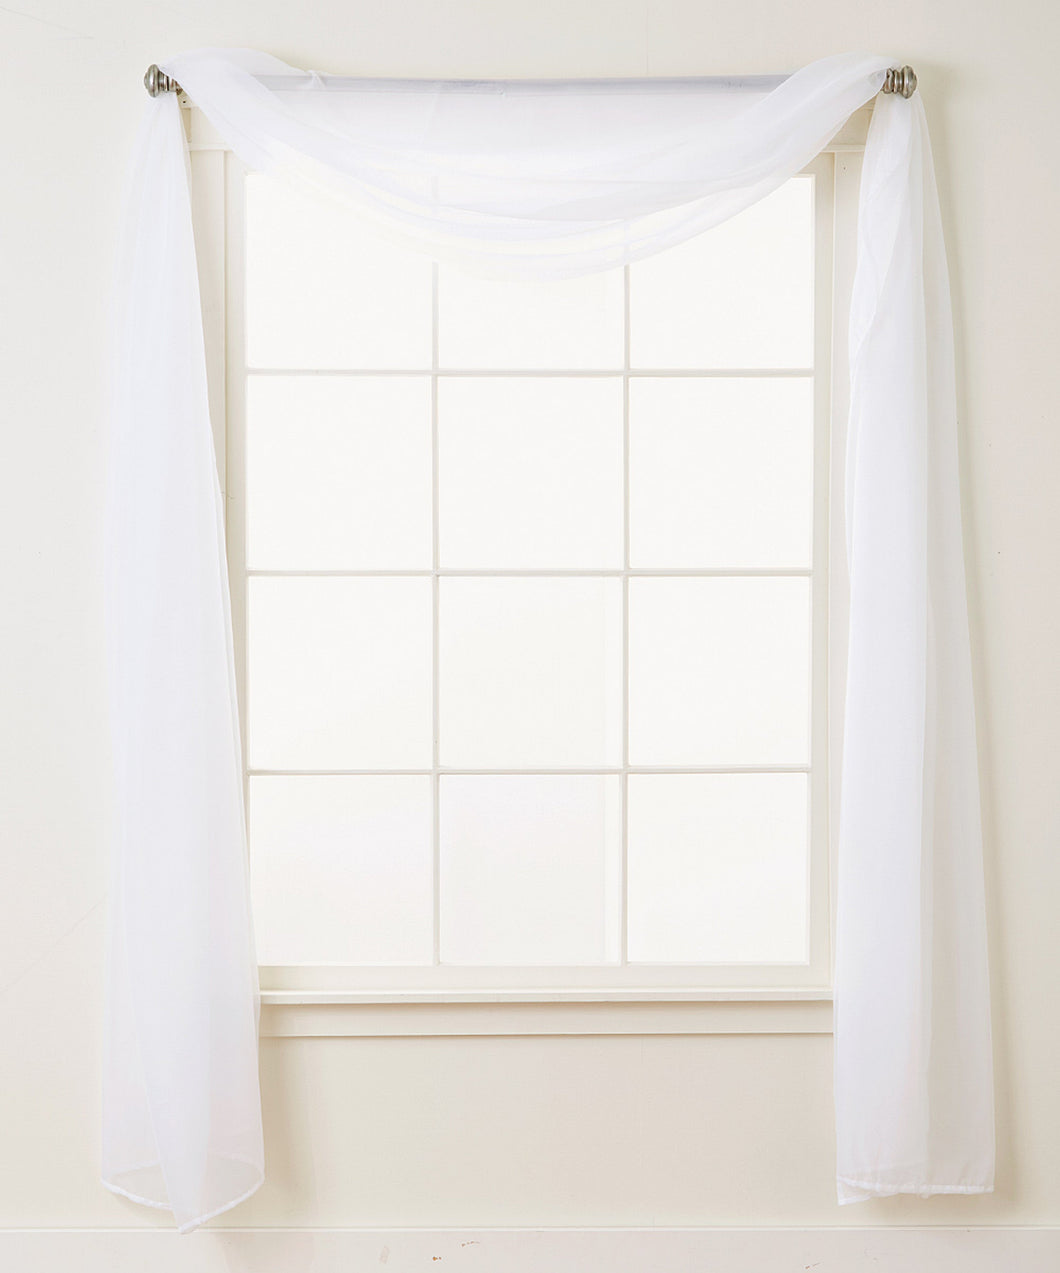 Scarf Sheer Curtain Panel with 2 inch Rod Pocket (1 Piece) 40